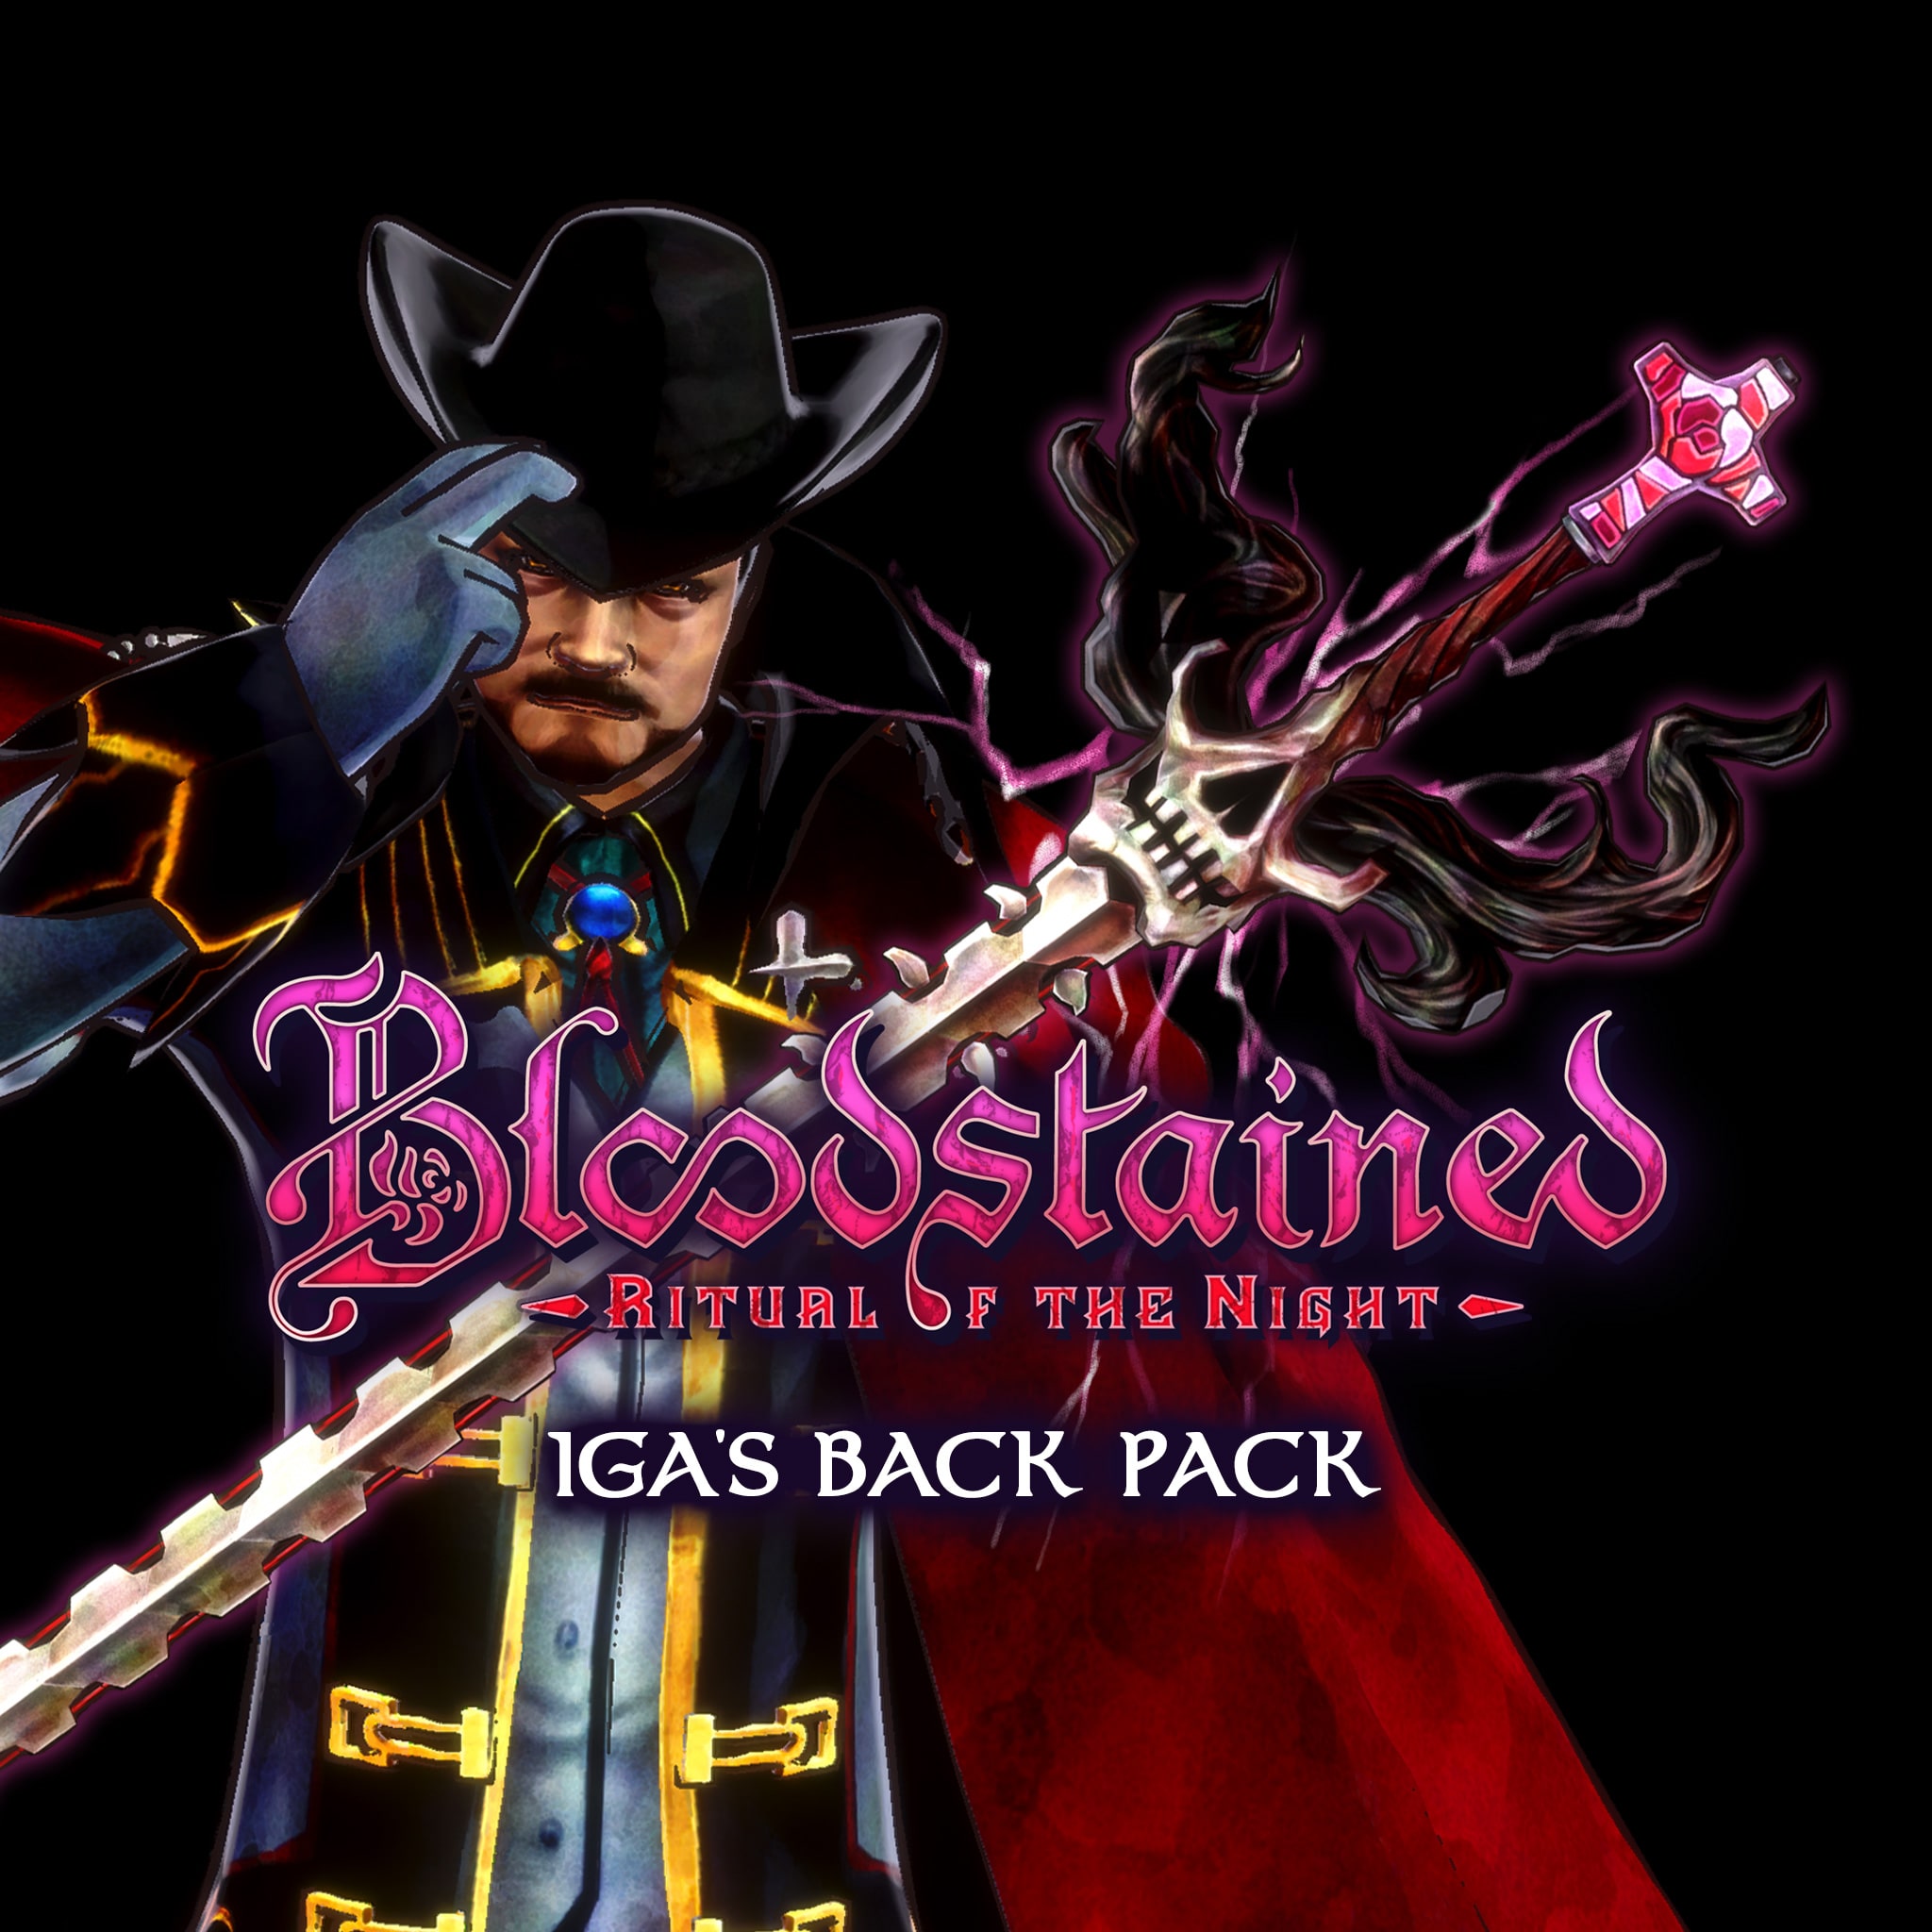 Bloodstained: Iga's Back Pack